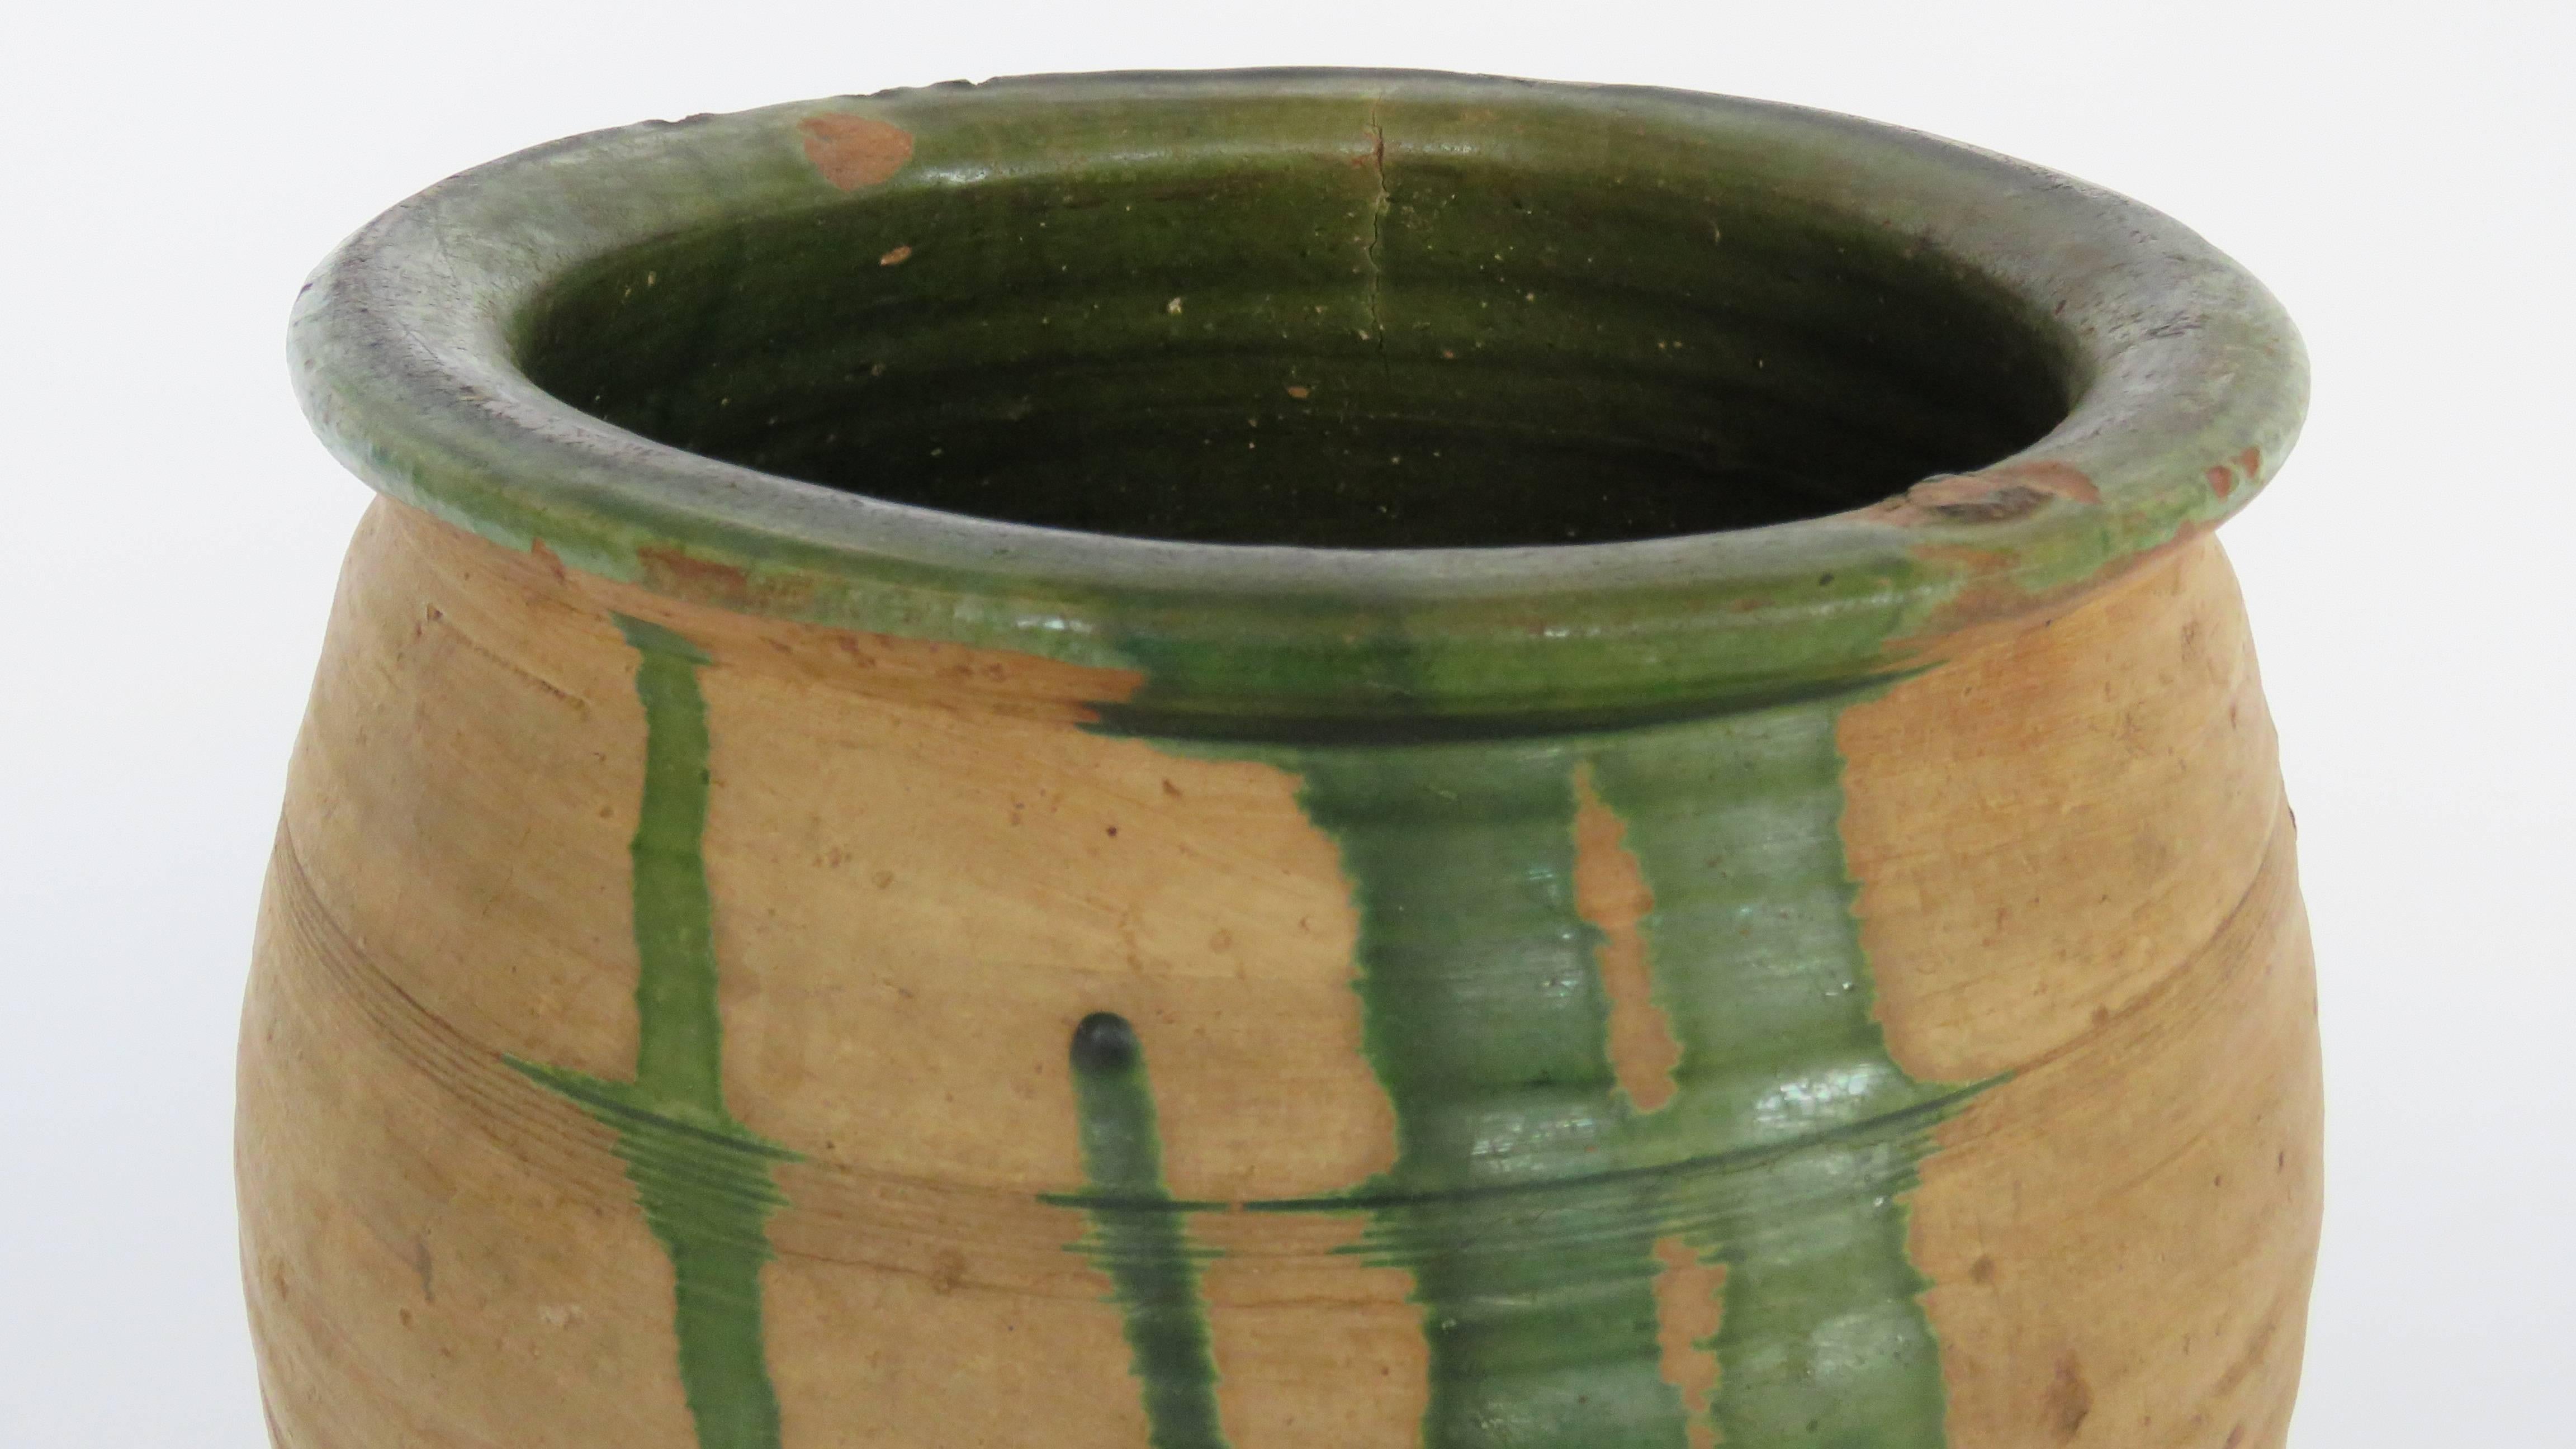 Hand coiled honey pot with morisco green drippy glaze.

Shipping costs per item diminish with purchase of additional items.
Photo of collection of pots it is to show more are available. Other pots are not included in price.